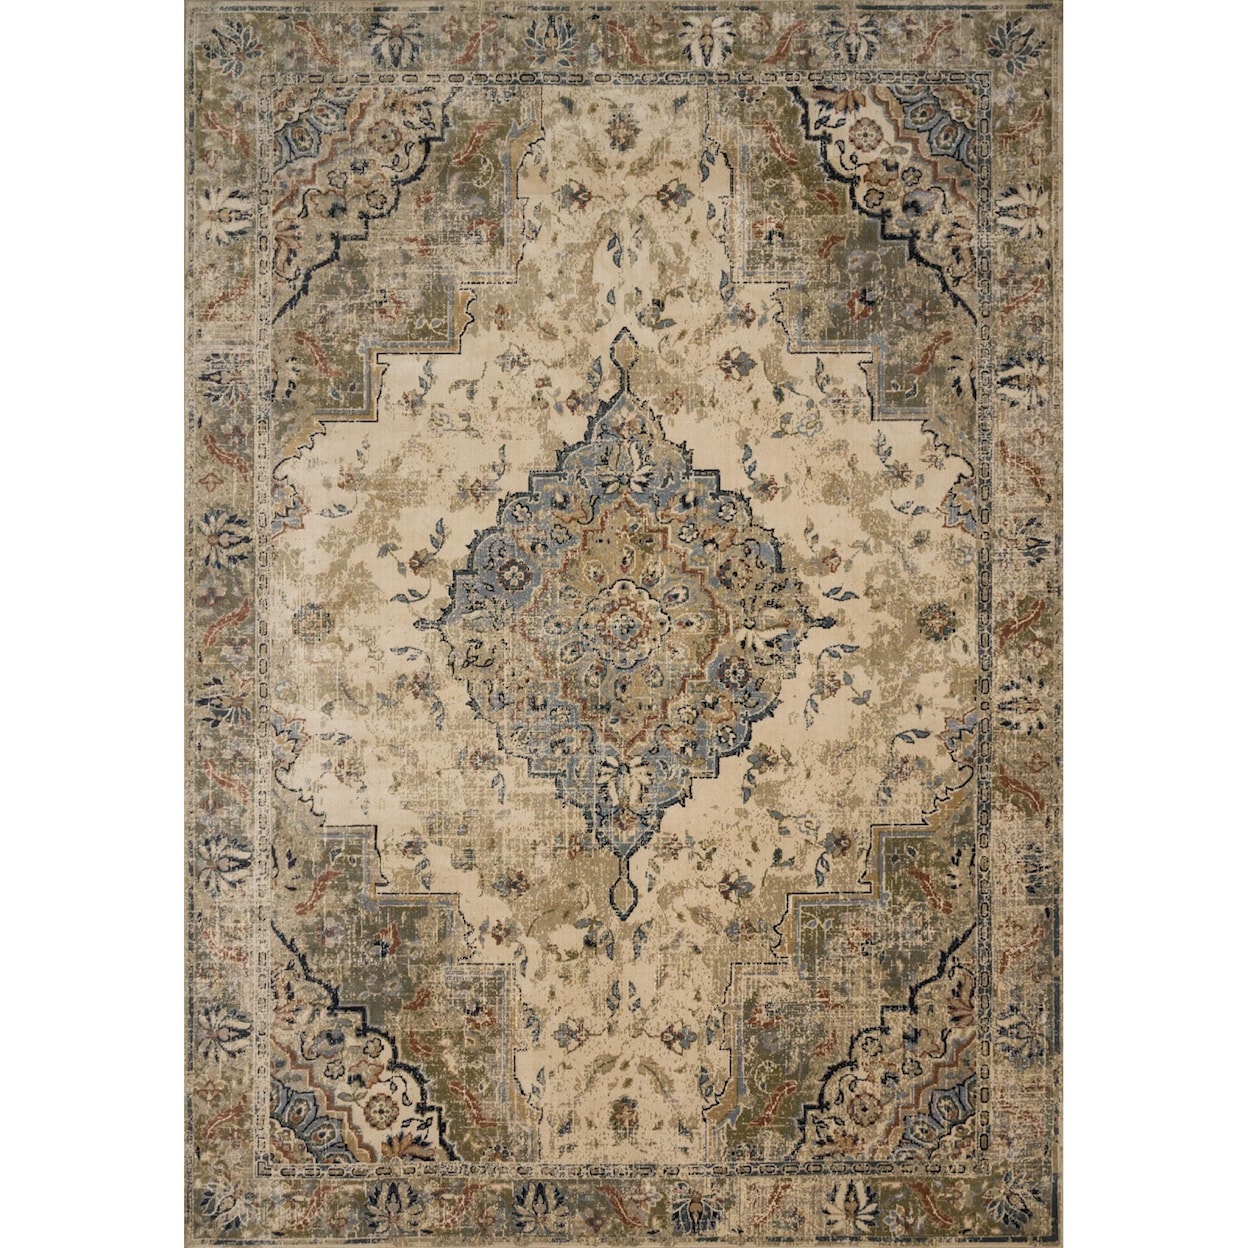 Magnolia Home by Joanna Gaines for Loloi Evie 2'-6" x 8'-0" Rug